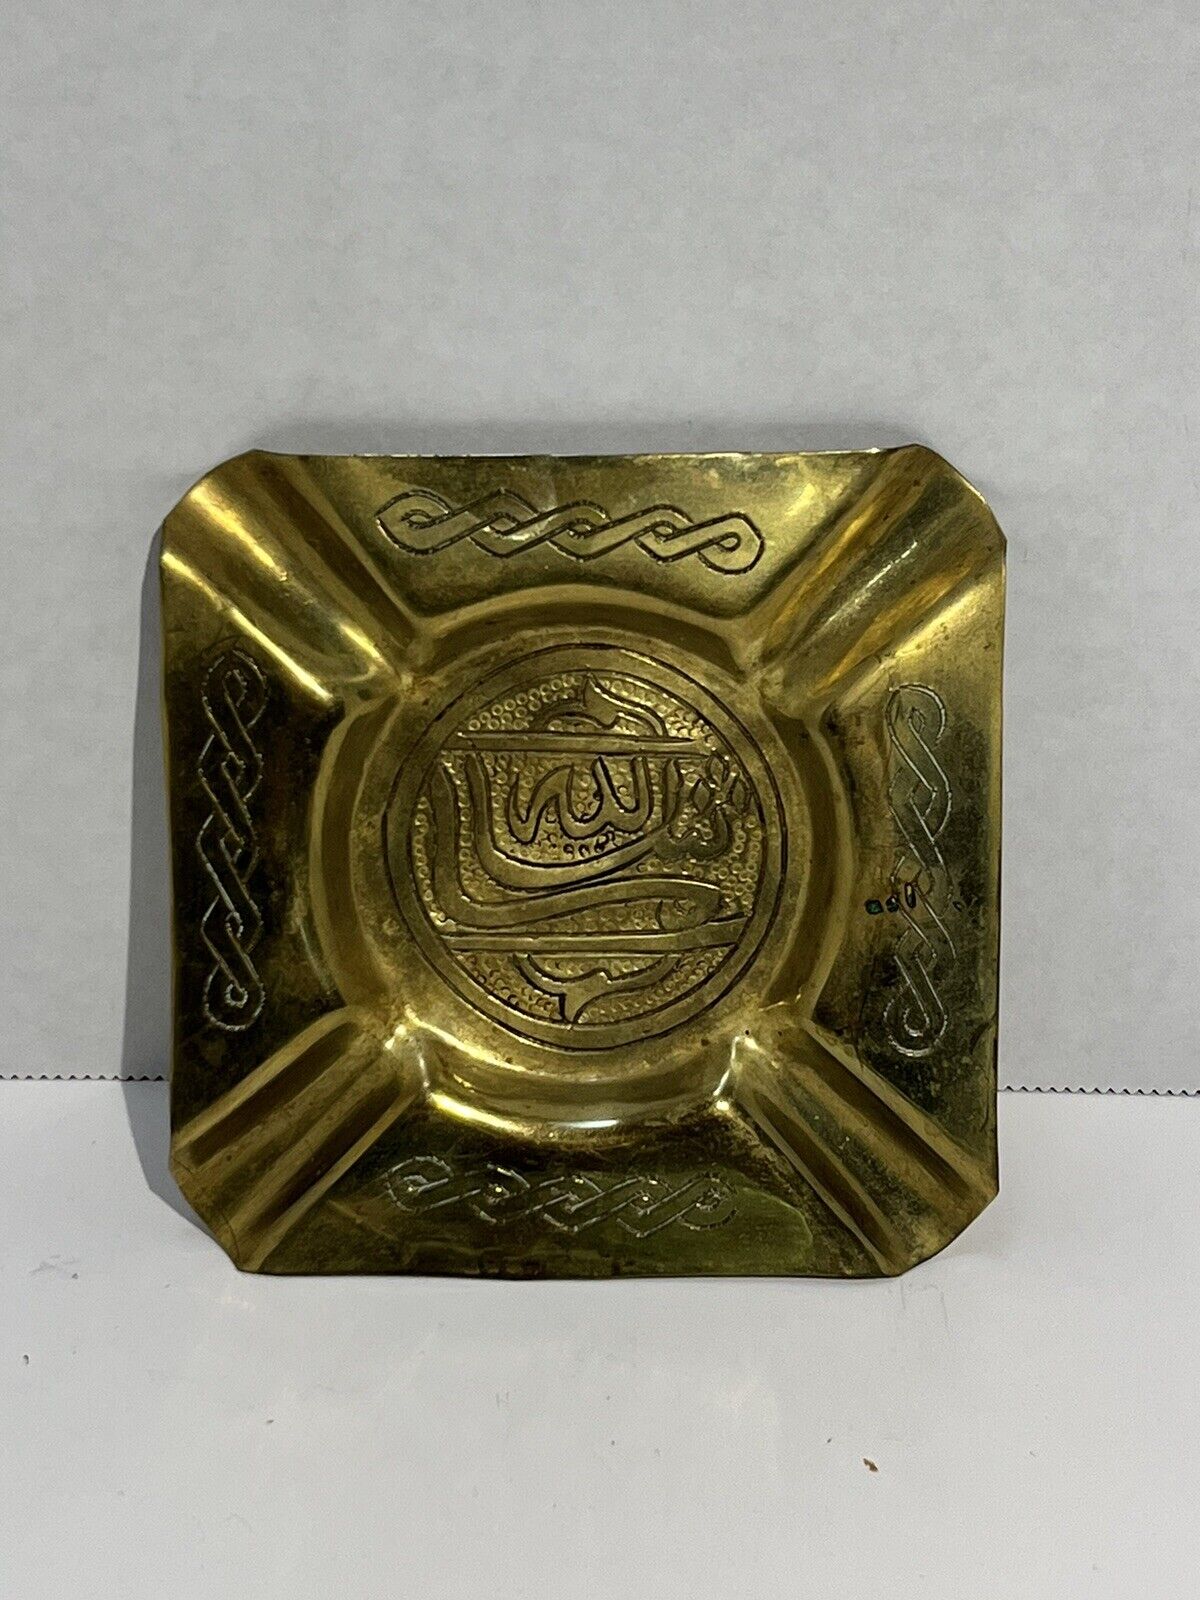 Vintage Islamic Engraved Brass Ashtray 4.5” Unmarked